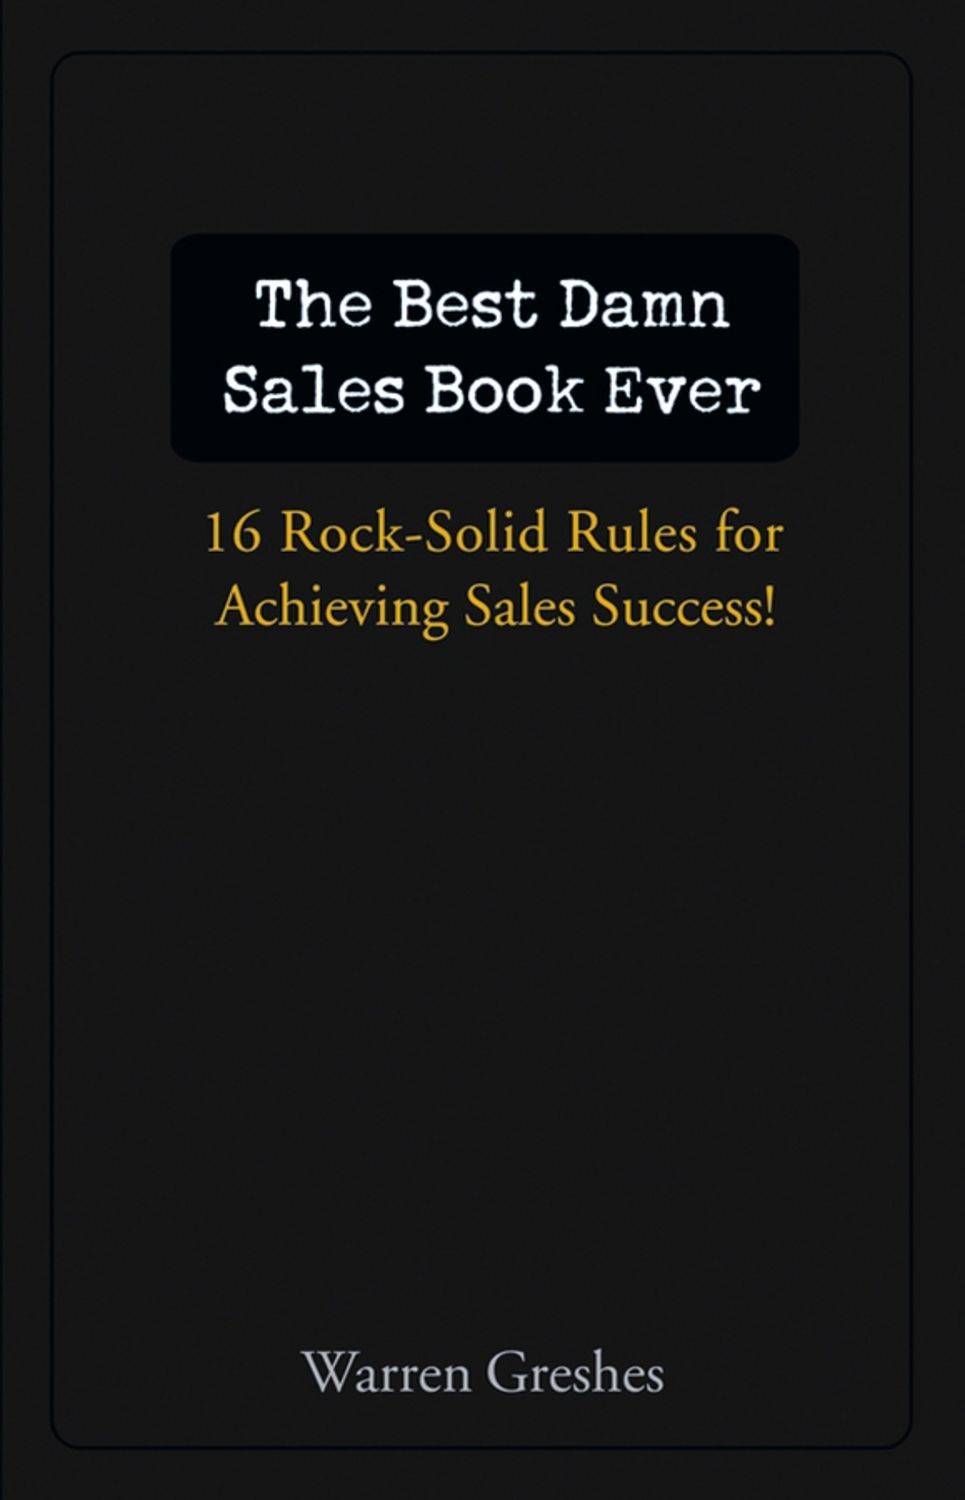 Sales book. The best damn sales book ever. The sales book.